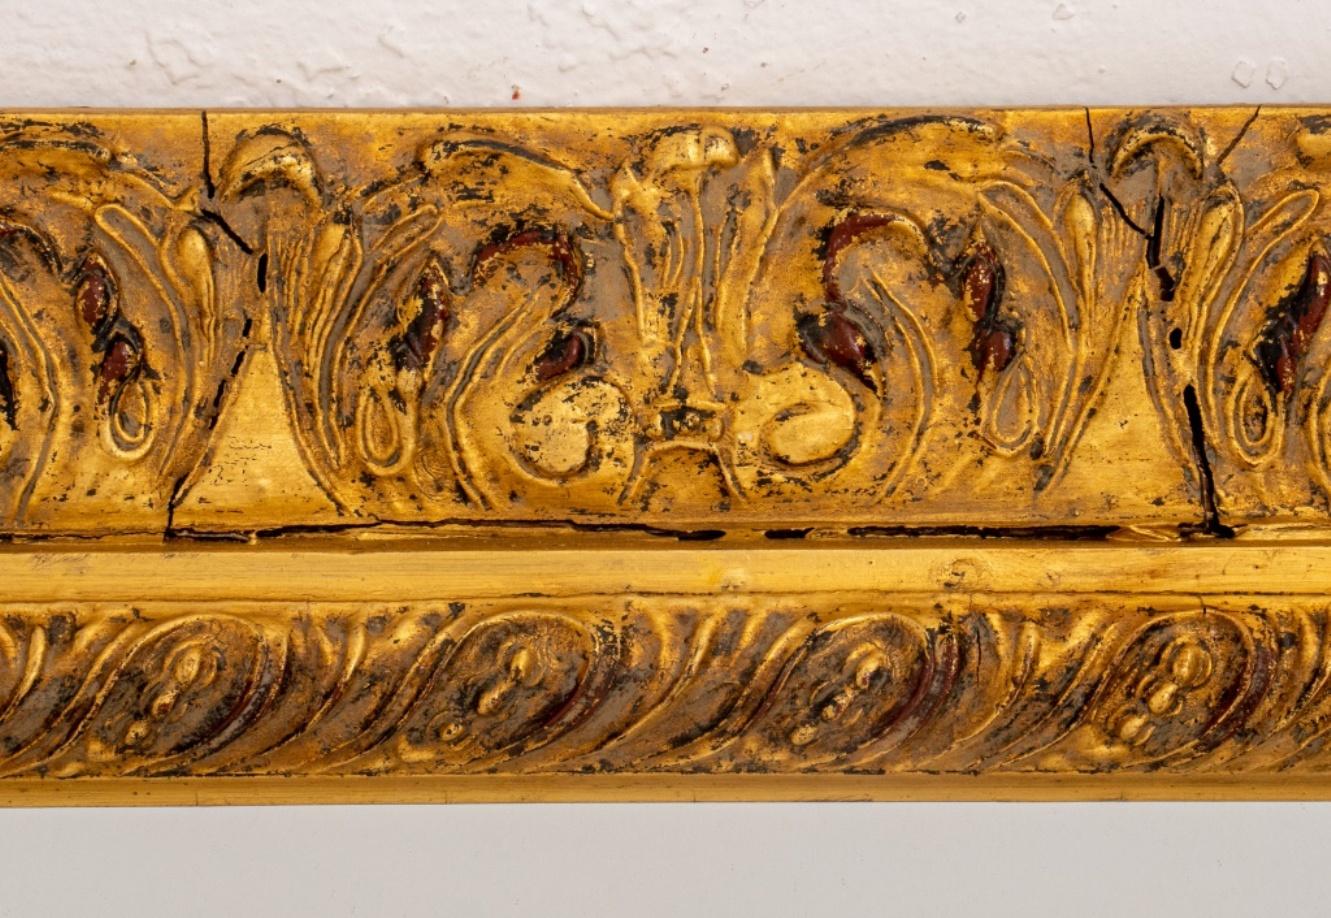 Baroque revival carved giltwood mantel mirror with acanthus leaf motif. In good condition. Wear consistent with age and use.

Dimensions: 34.5